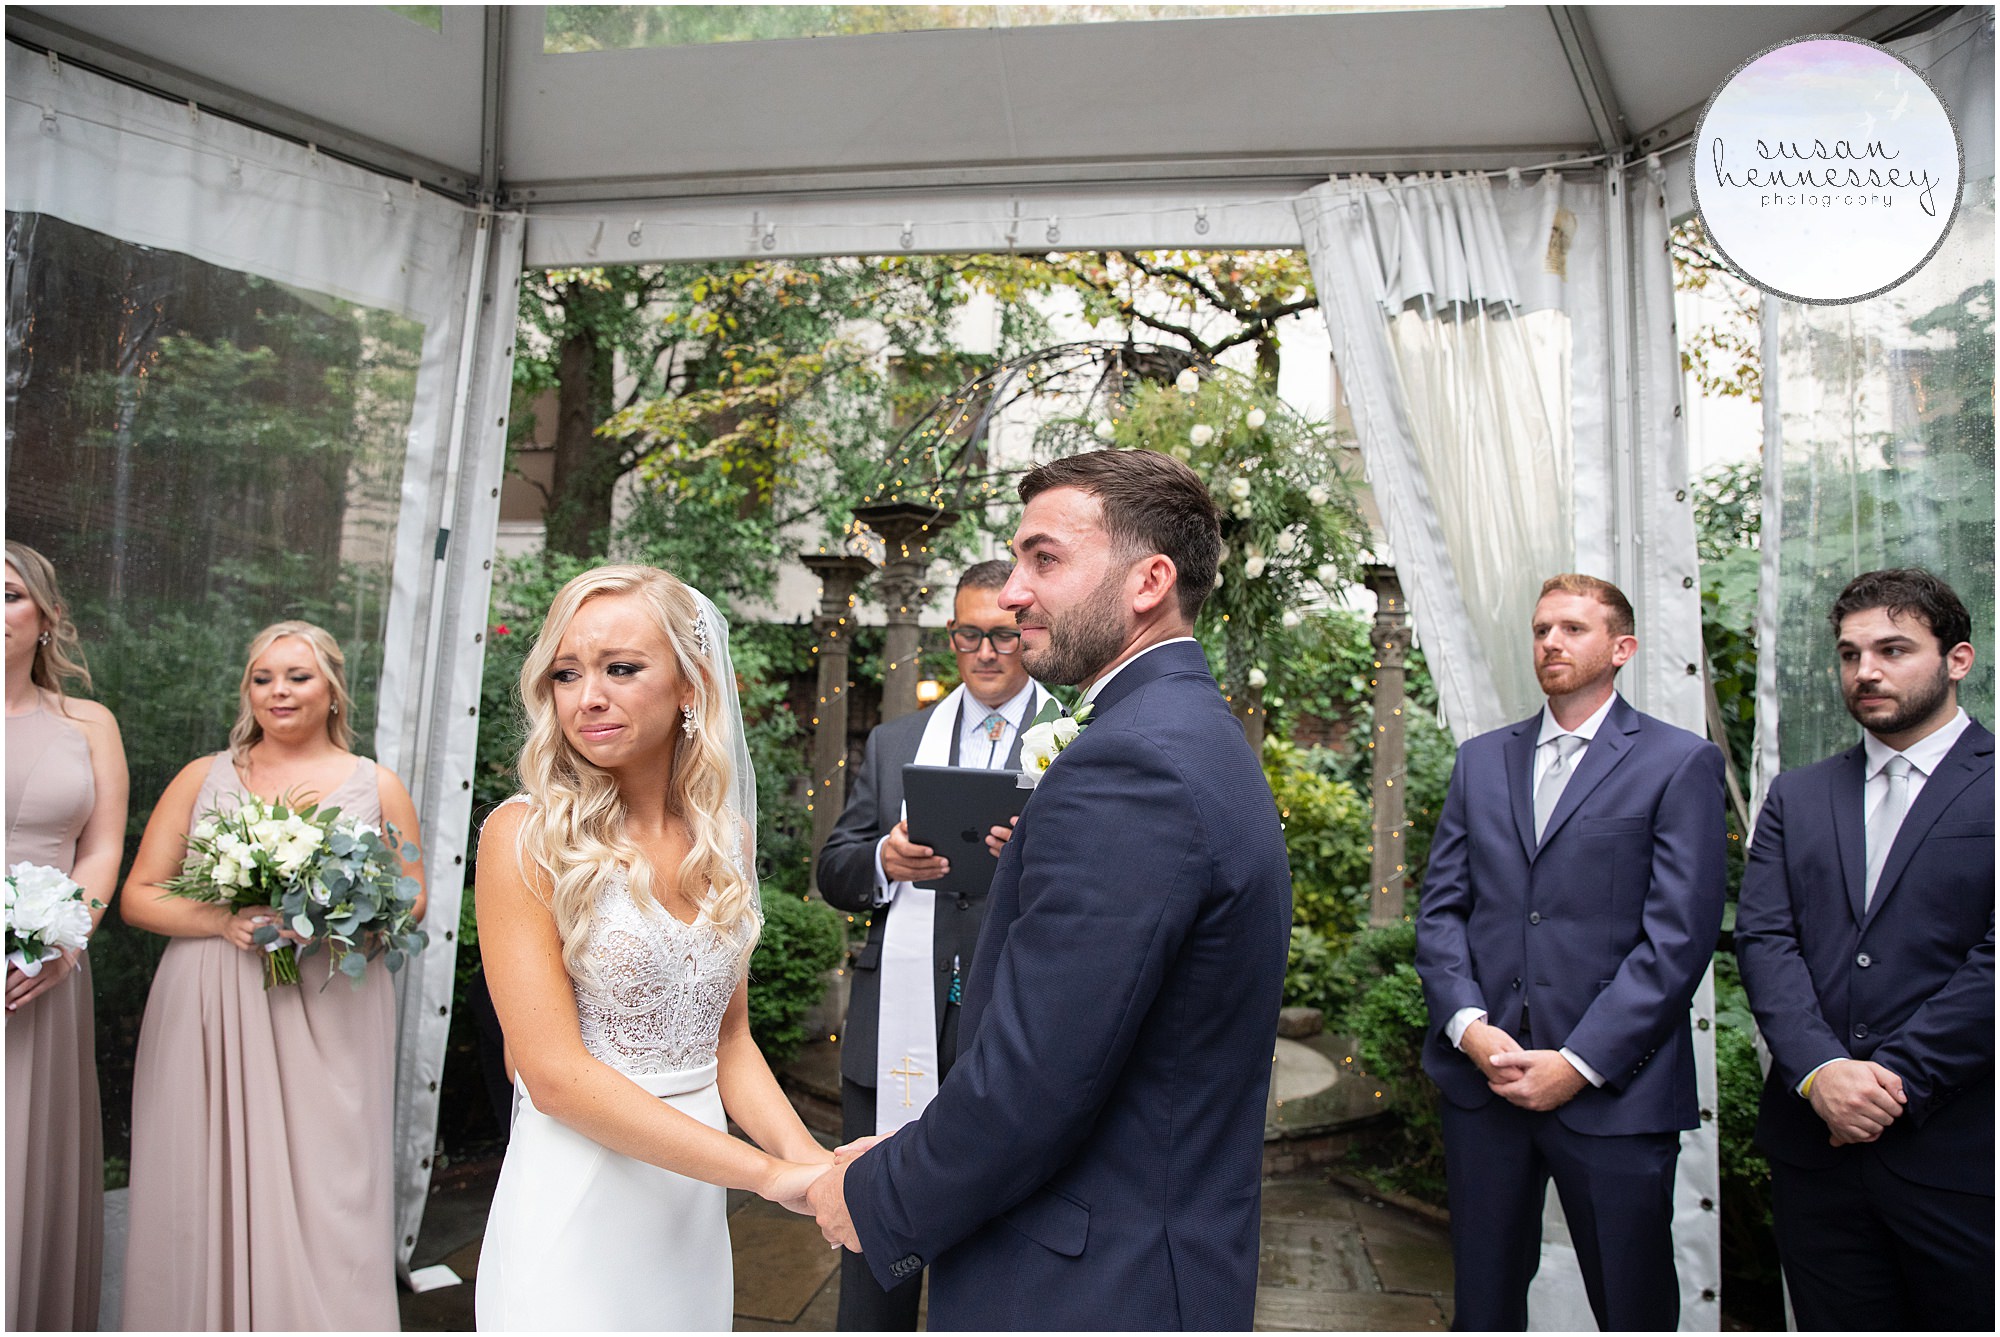 Susan Hennessey Photography Best of 2020 Weddings - Emotional ceremony at Philadelphia microwedding at Morris House Hotel